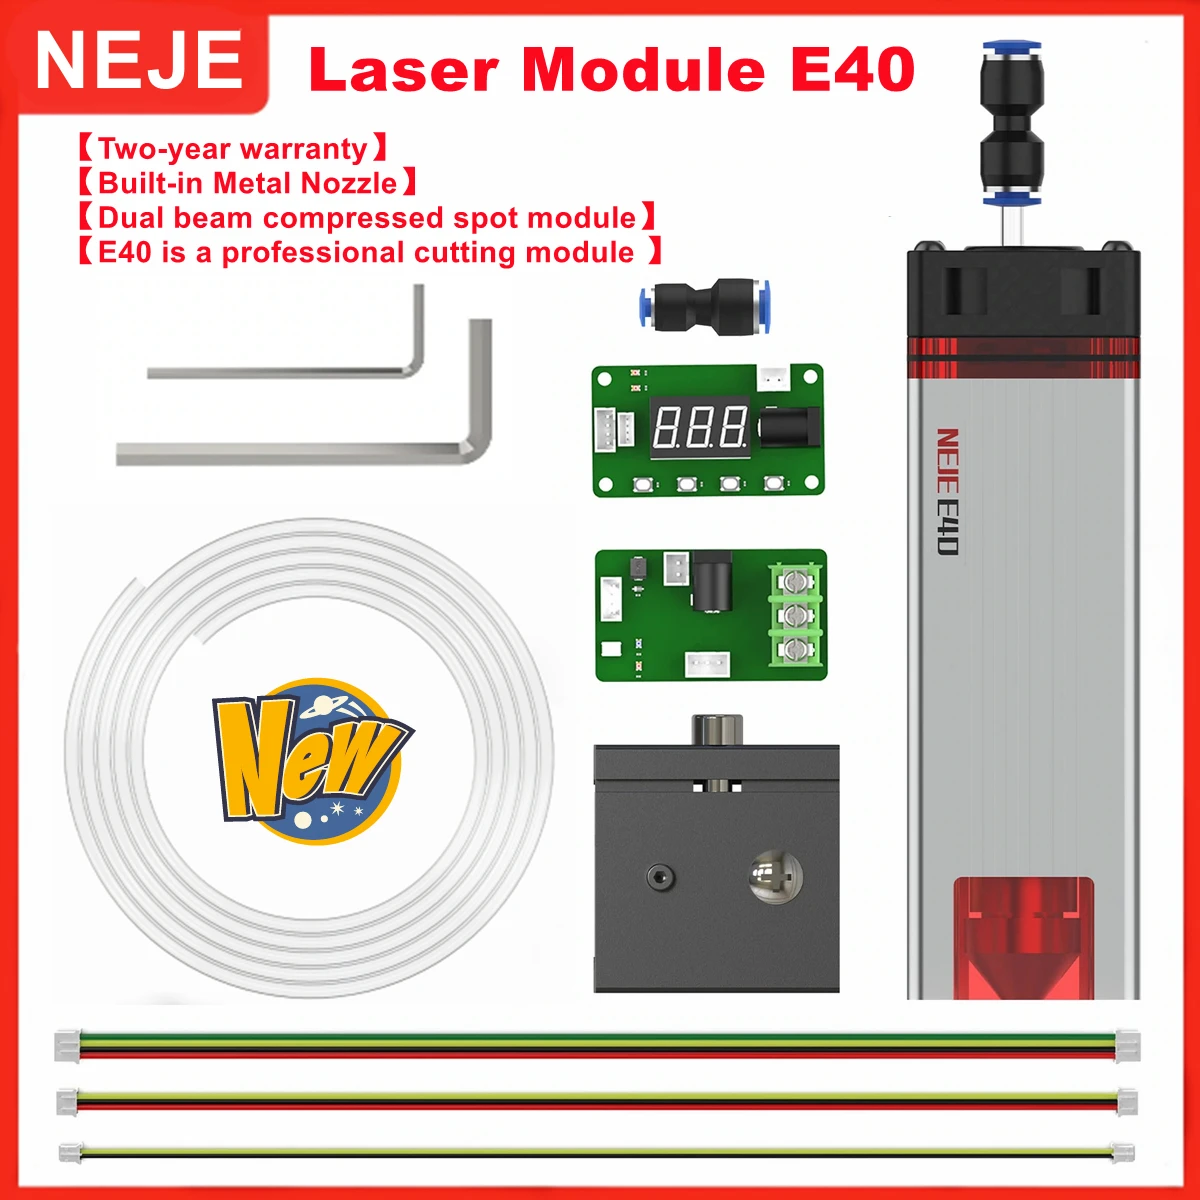 NEJE E40 Fixed Focus Dual Beam 80W Laser Module Head for Stainless Steel/Metal Engraving and Professional Wood Cutting Tools